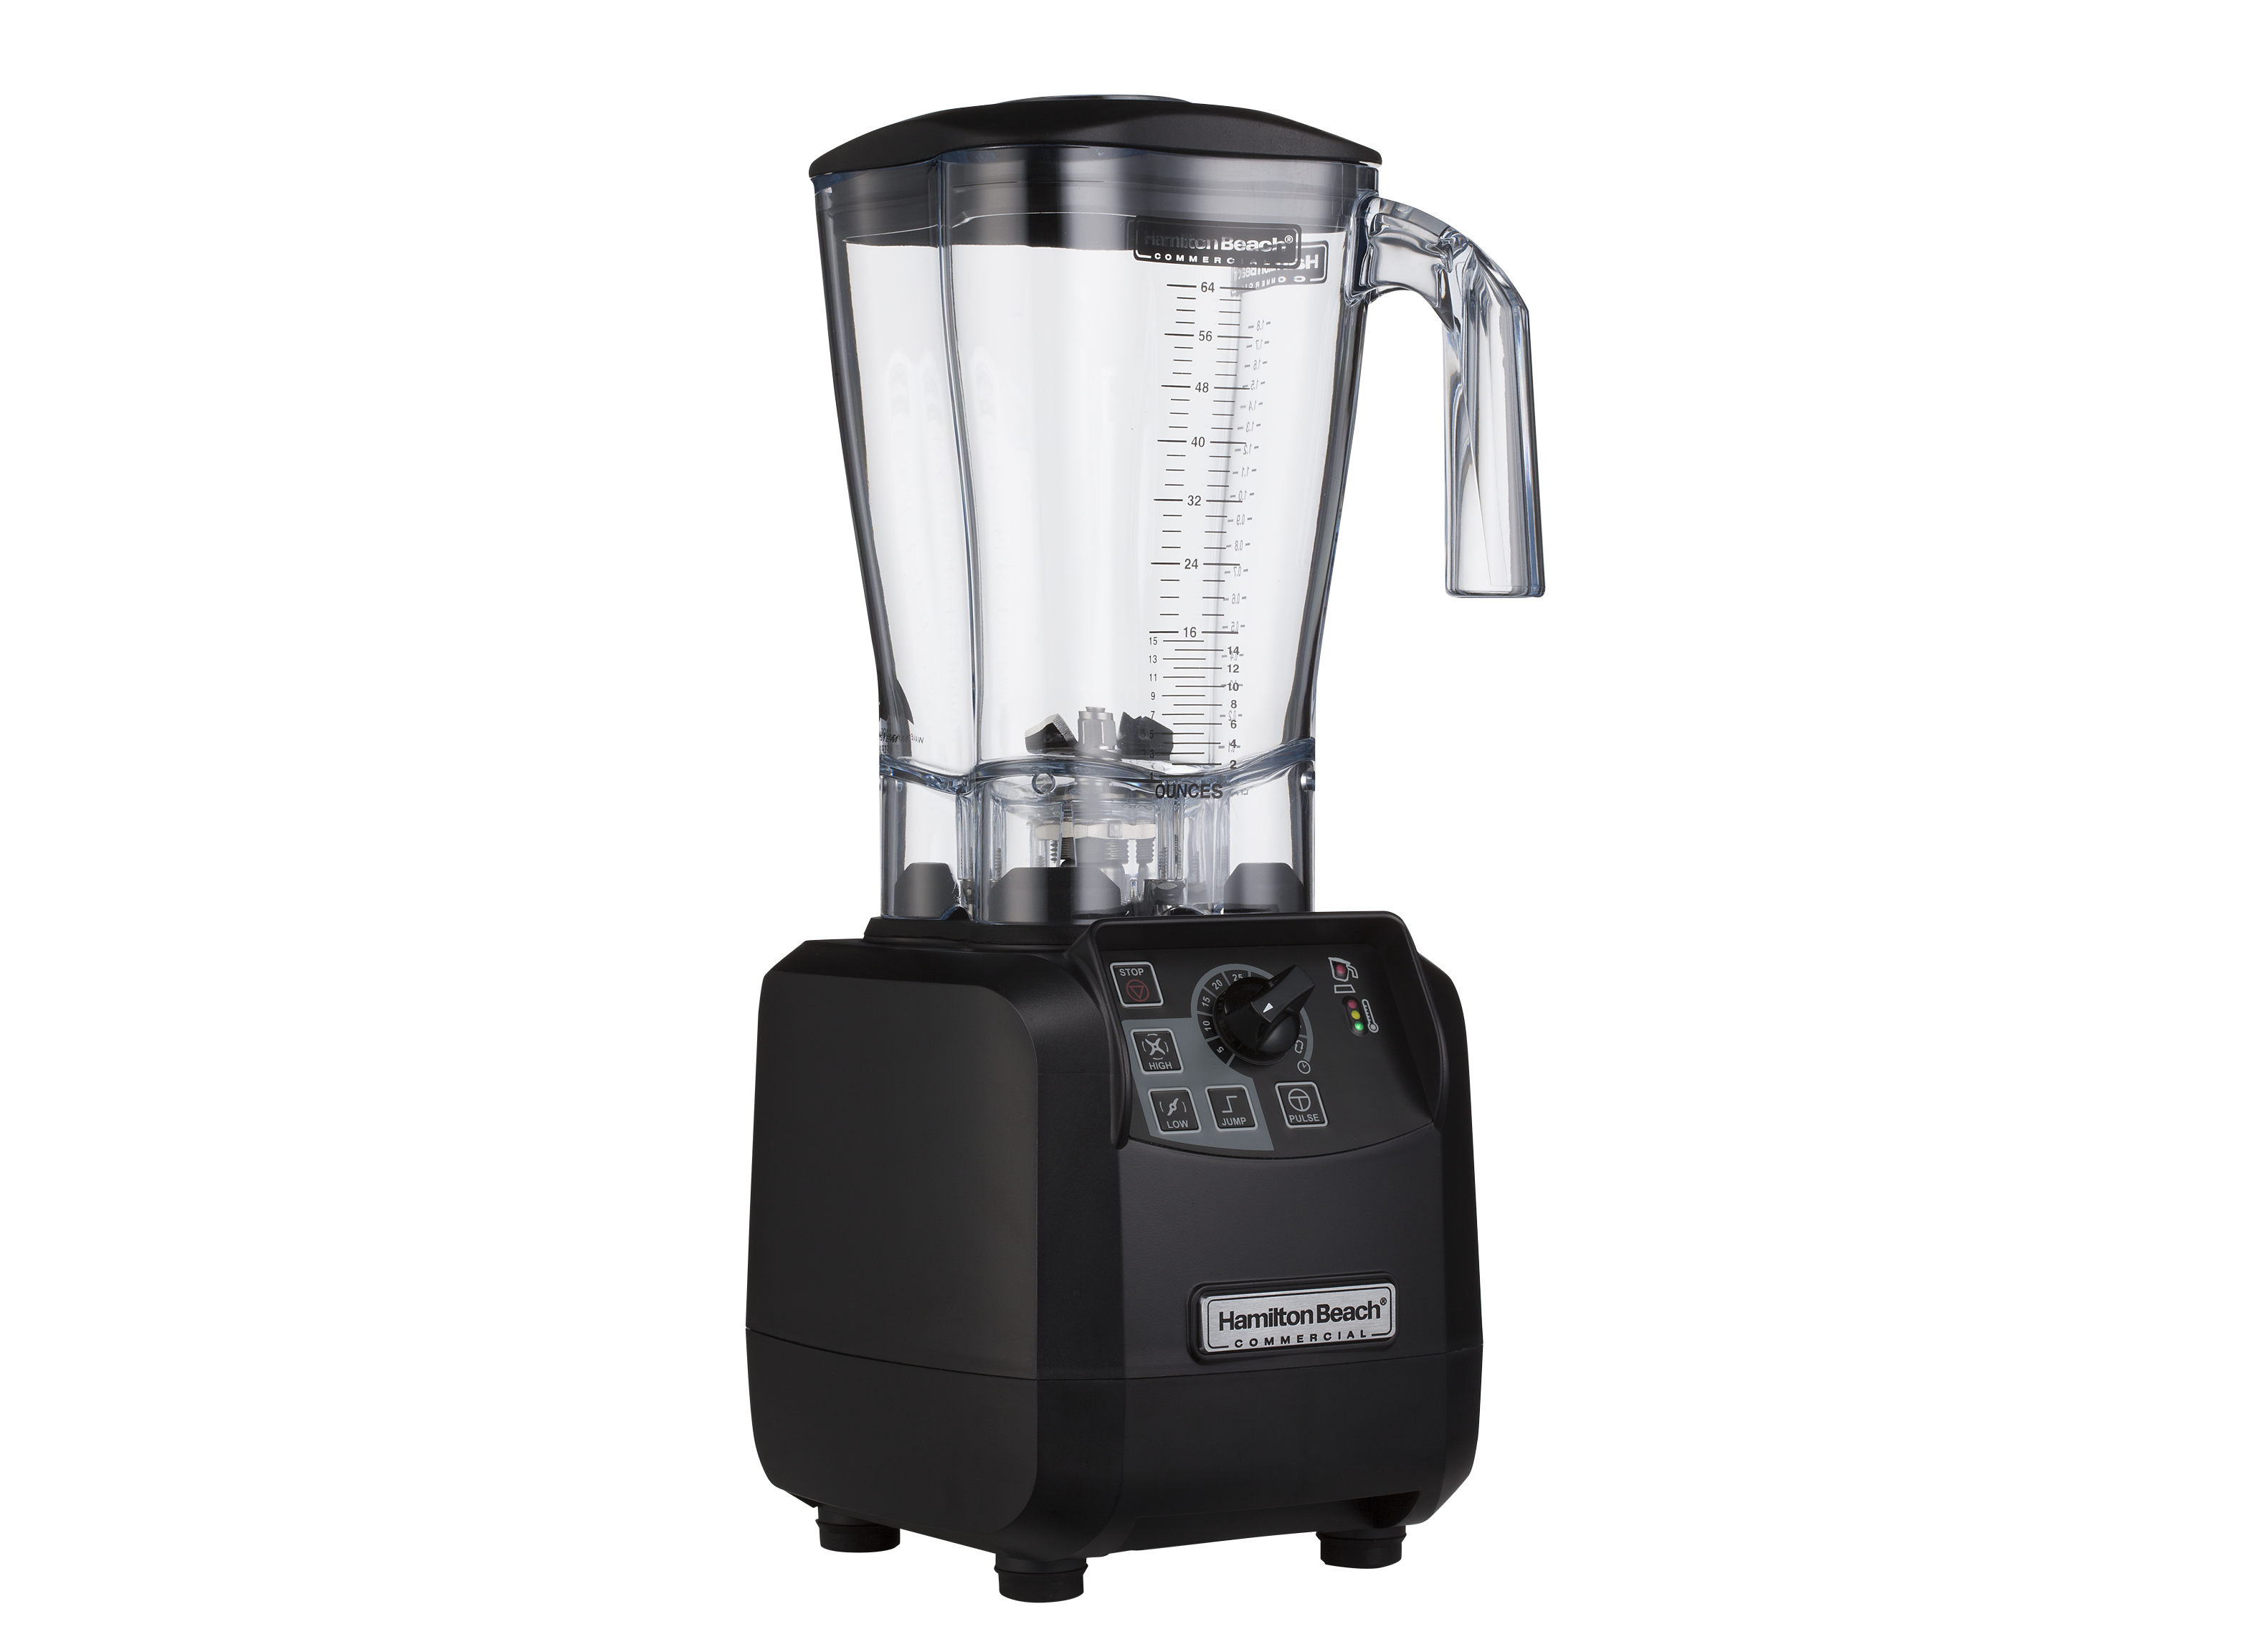 https://crdms.images.consumerreports.org/prod/products/cr/models/47113-blenders-hamiltonbeach-commercialtempesthbh650.png